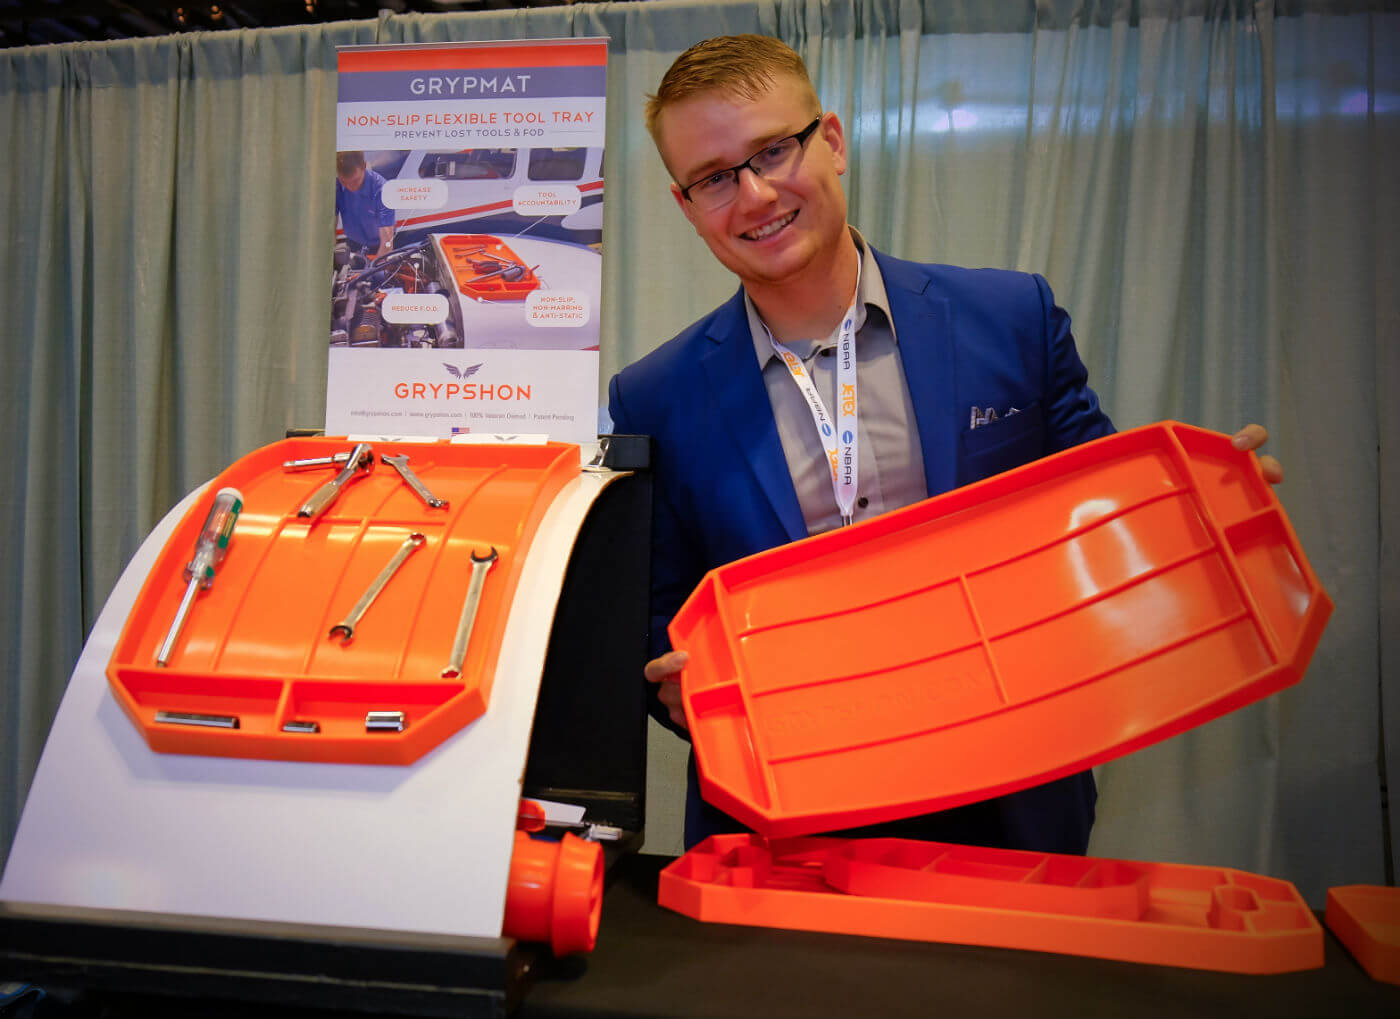 Tom Burden is the inventor of the GrypMat, an innovative tool tray designed specifically for aircraft mechanics. Ben Forrest Photo